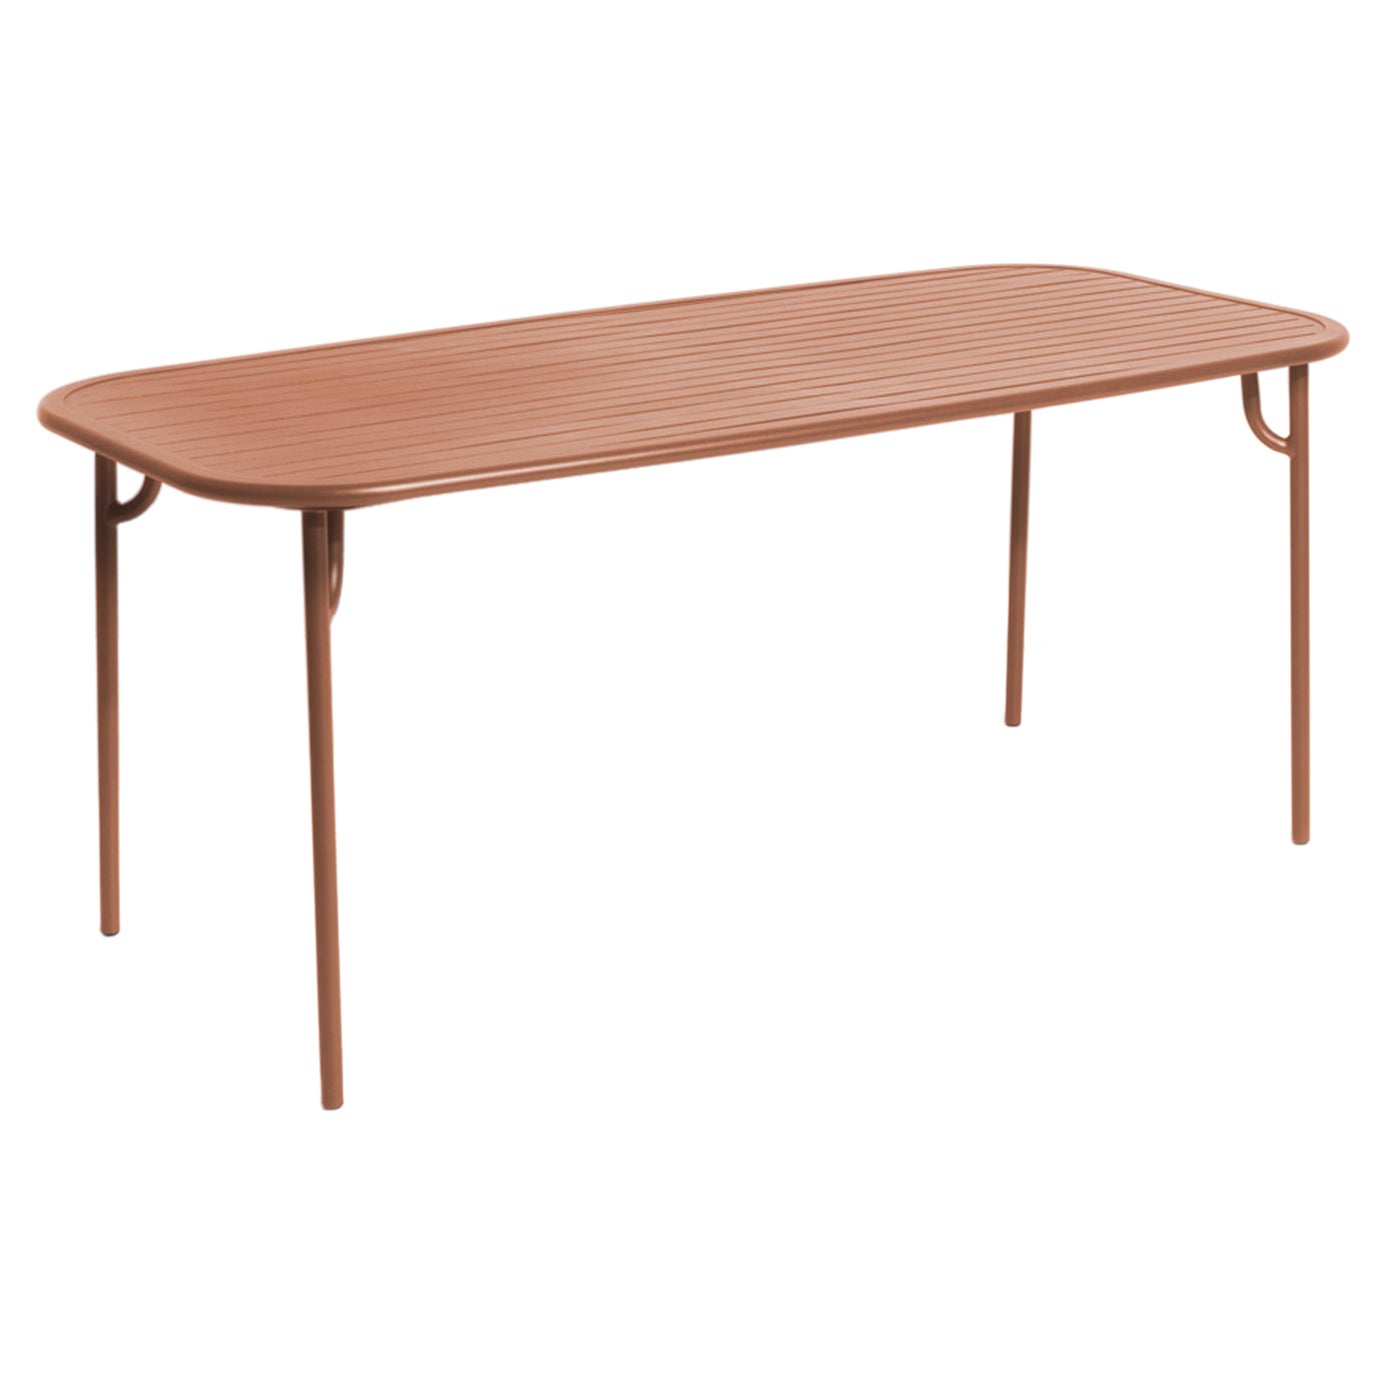 Petite Friture Week-End Medium Rectangular Dining Table in Terracotta with Slats For Sale